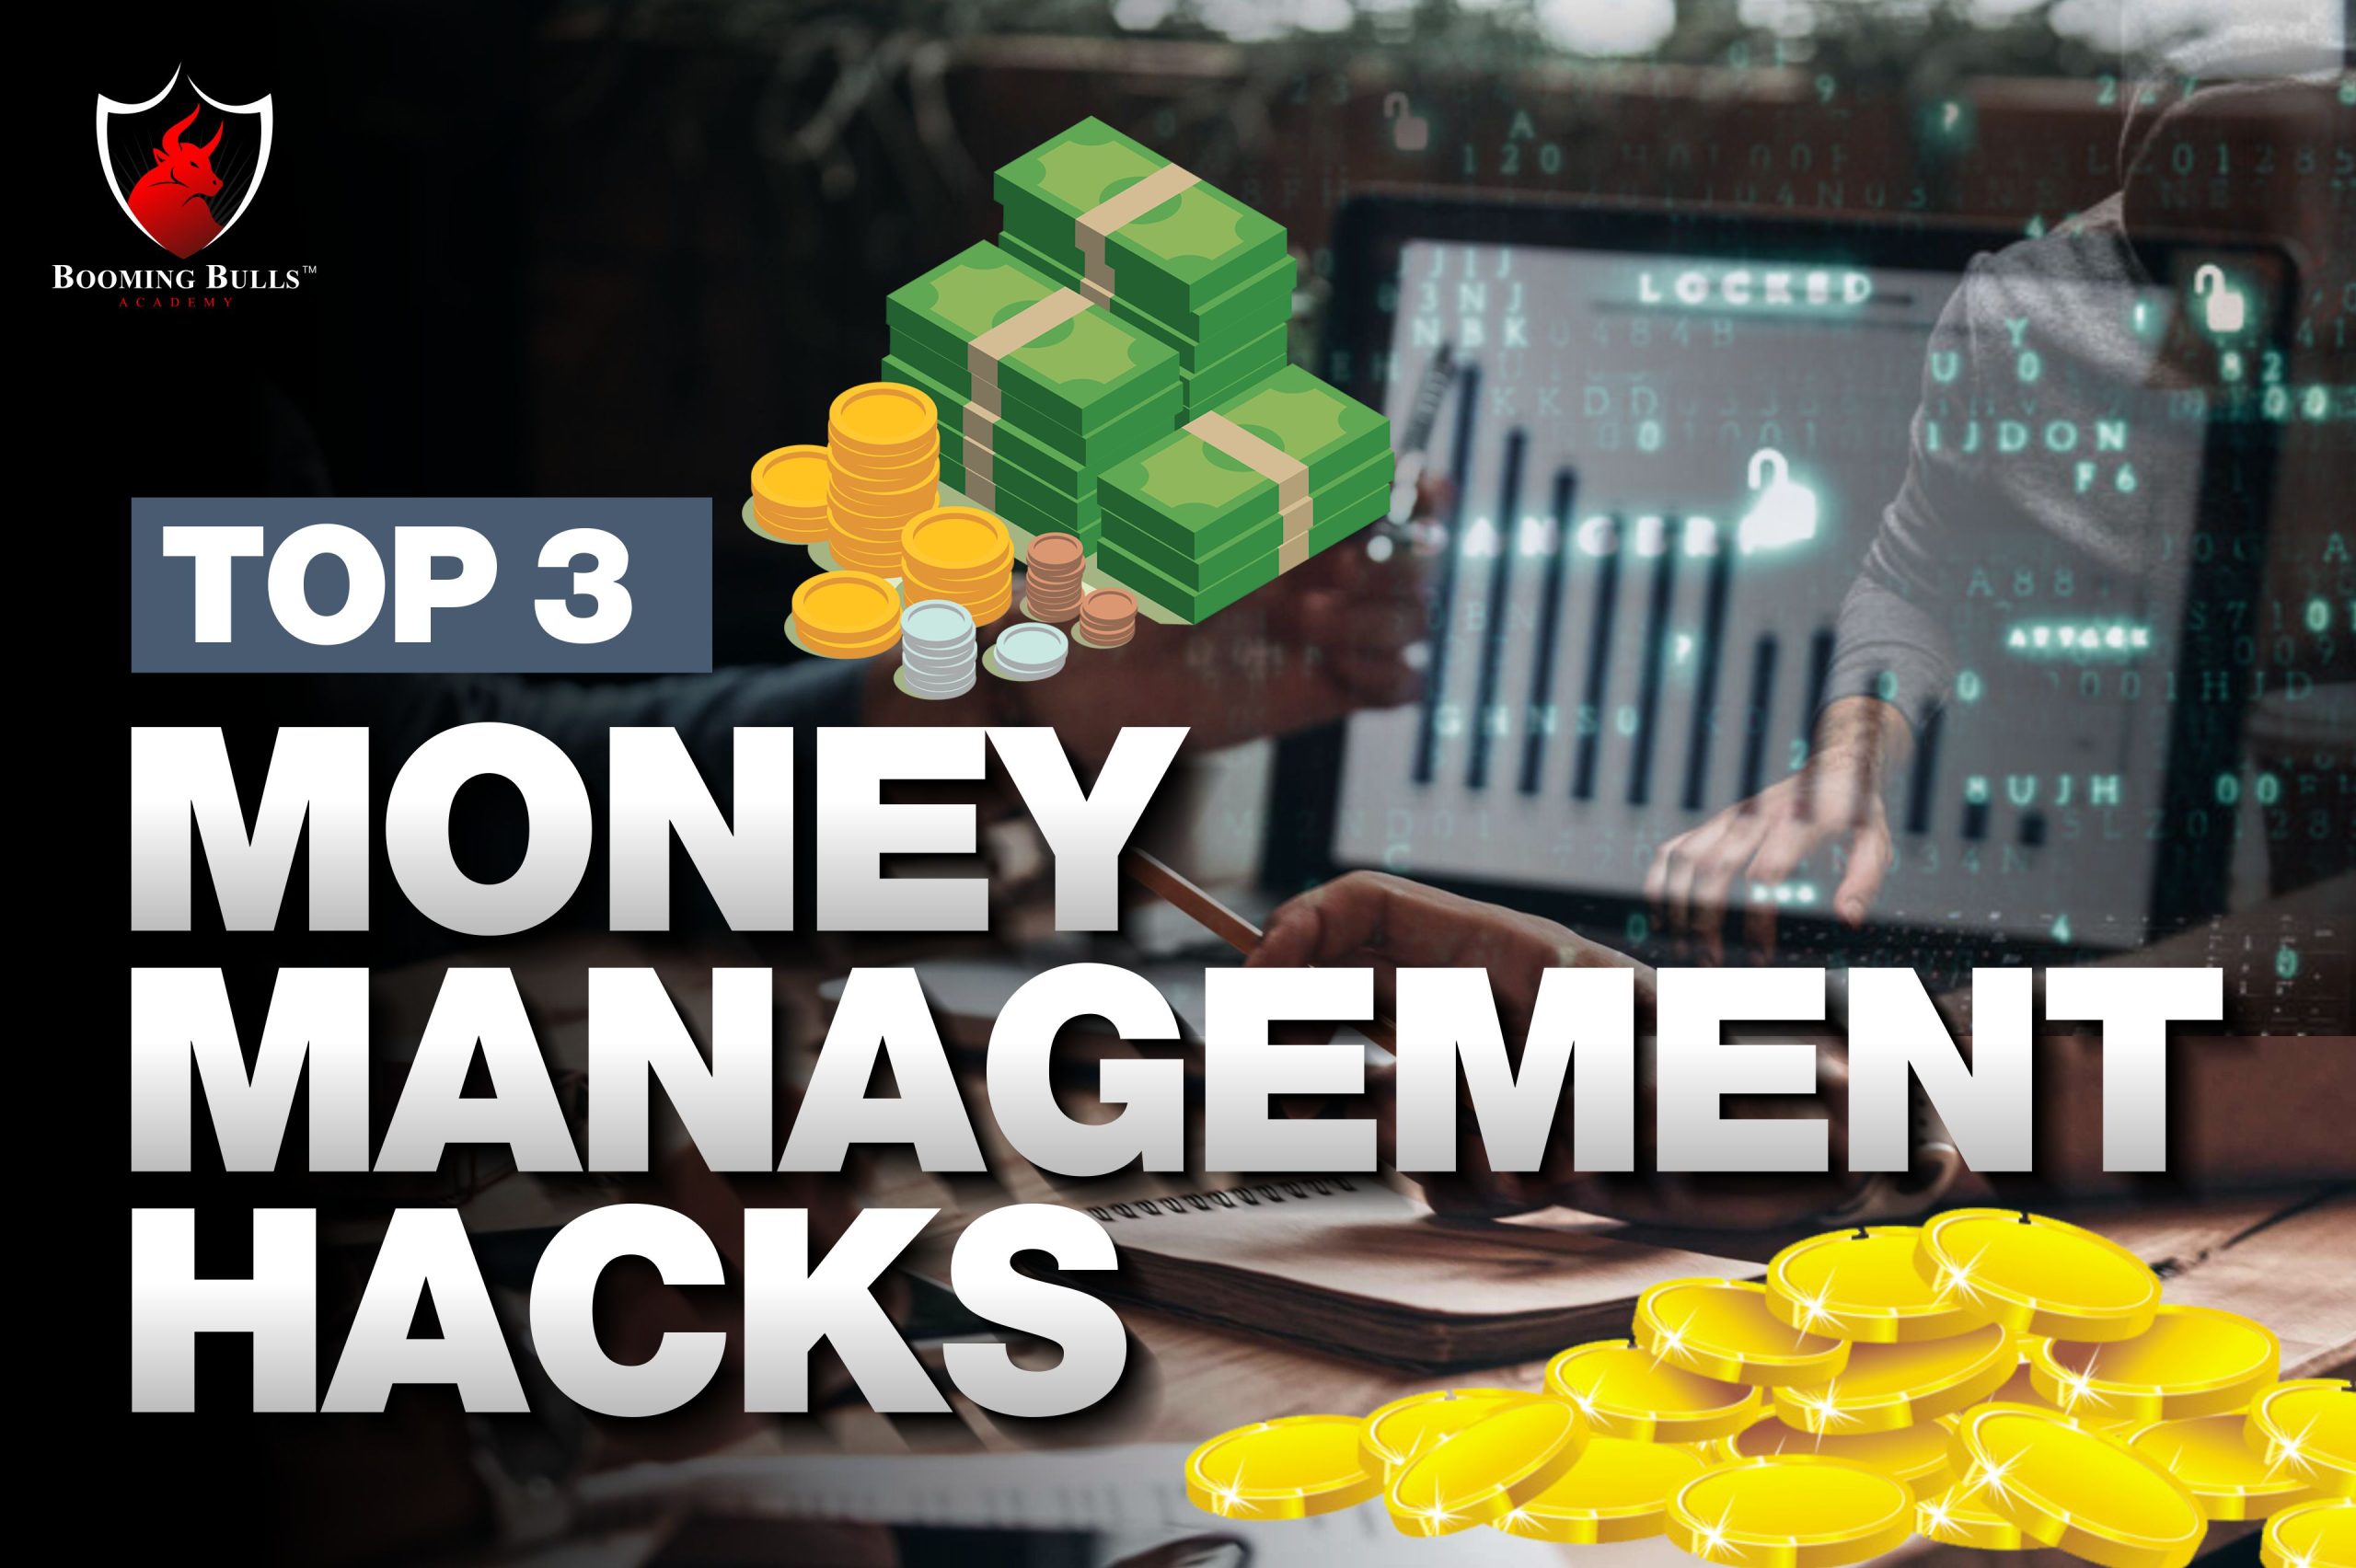 Top 3 Money Management Hacks No One Will Tell You About